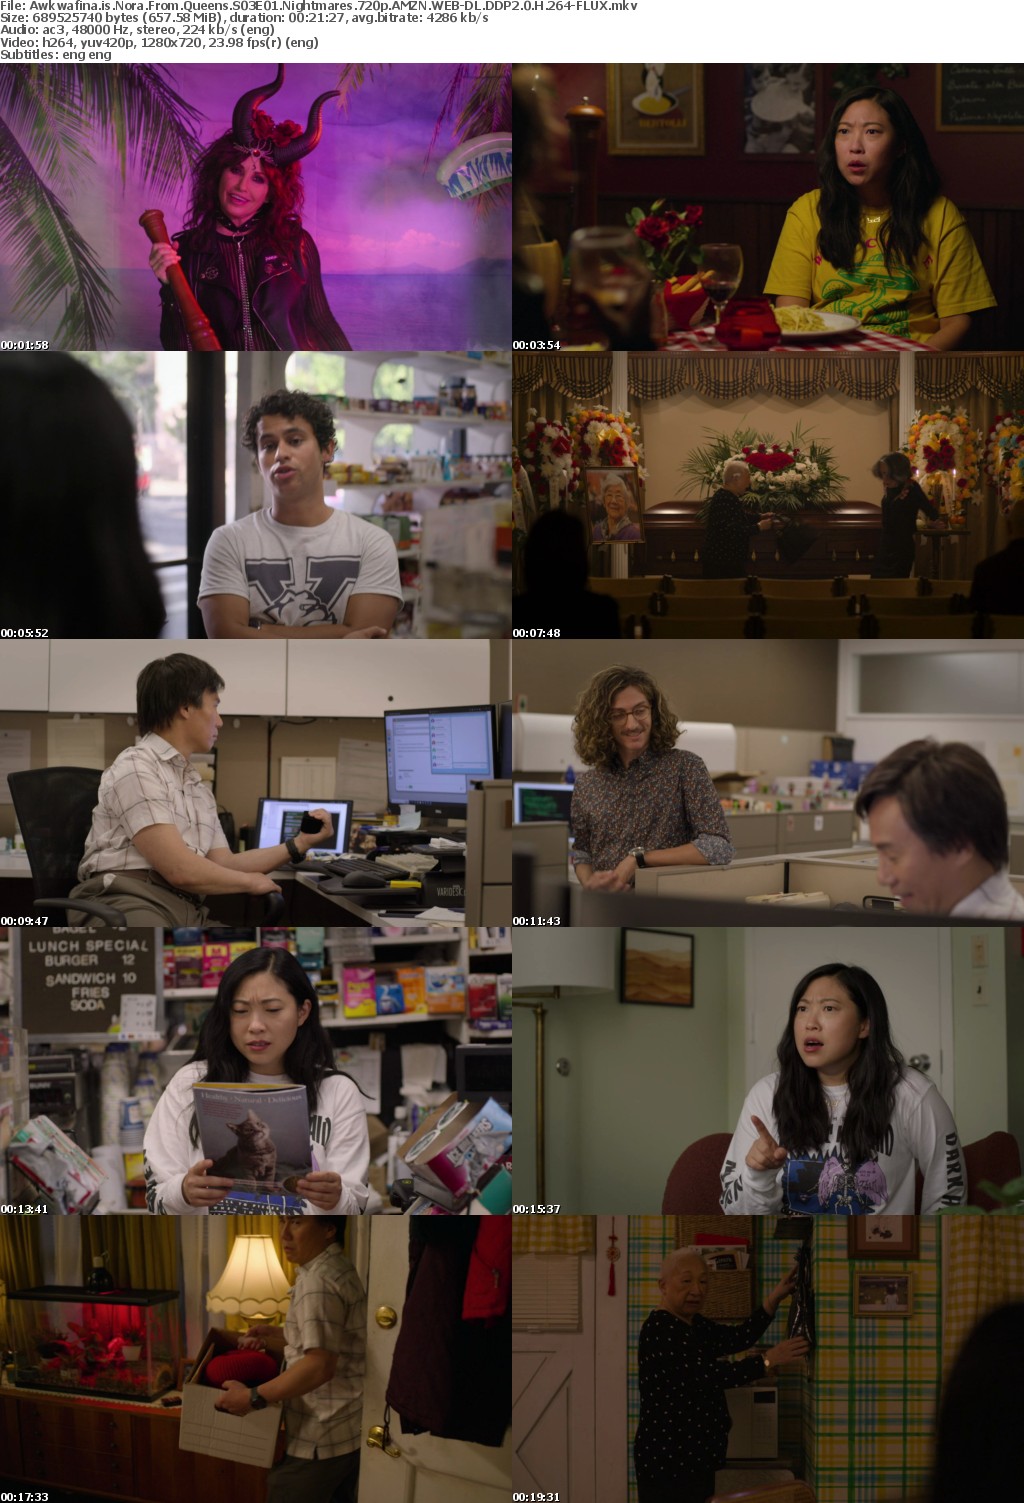 Awkwafina is Nora From Queens S03E01 Nightmares 720p AMZN WEBRip DDP2 0 x264-FLUX